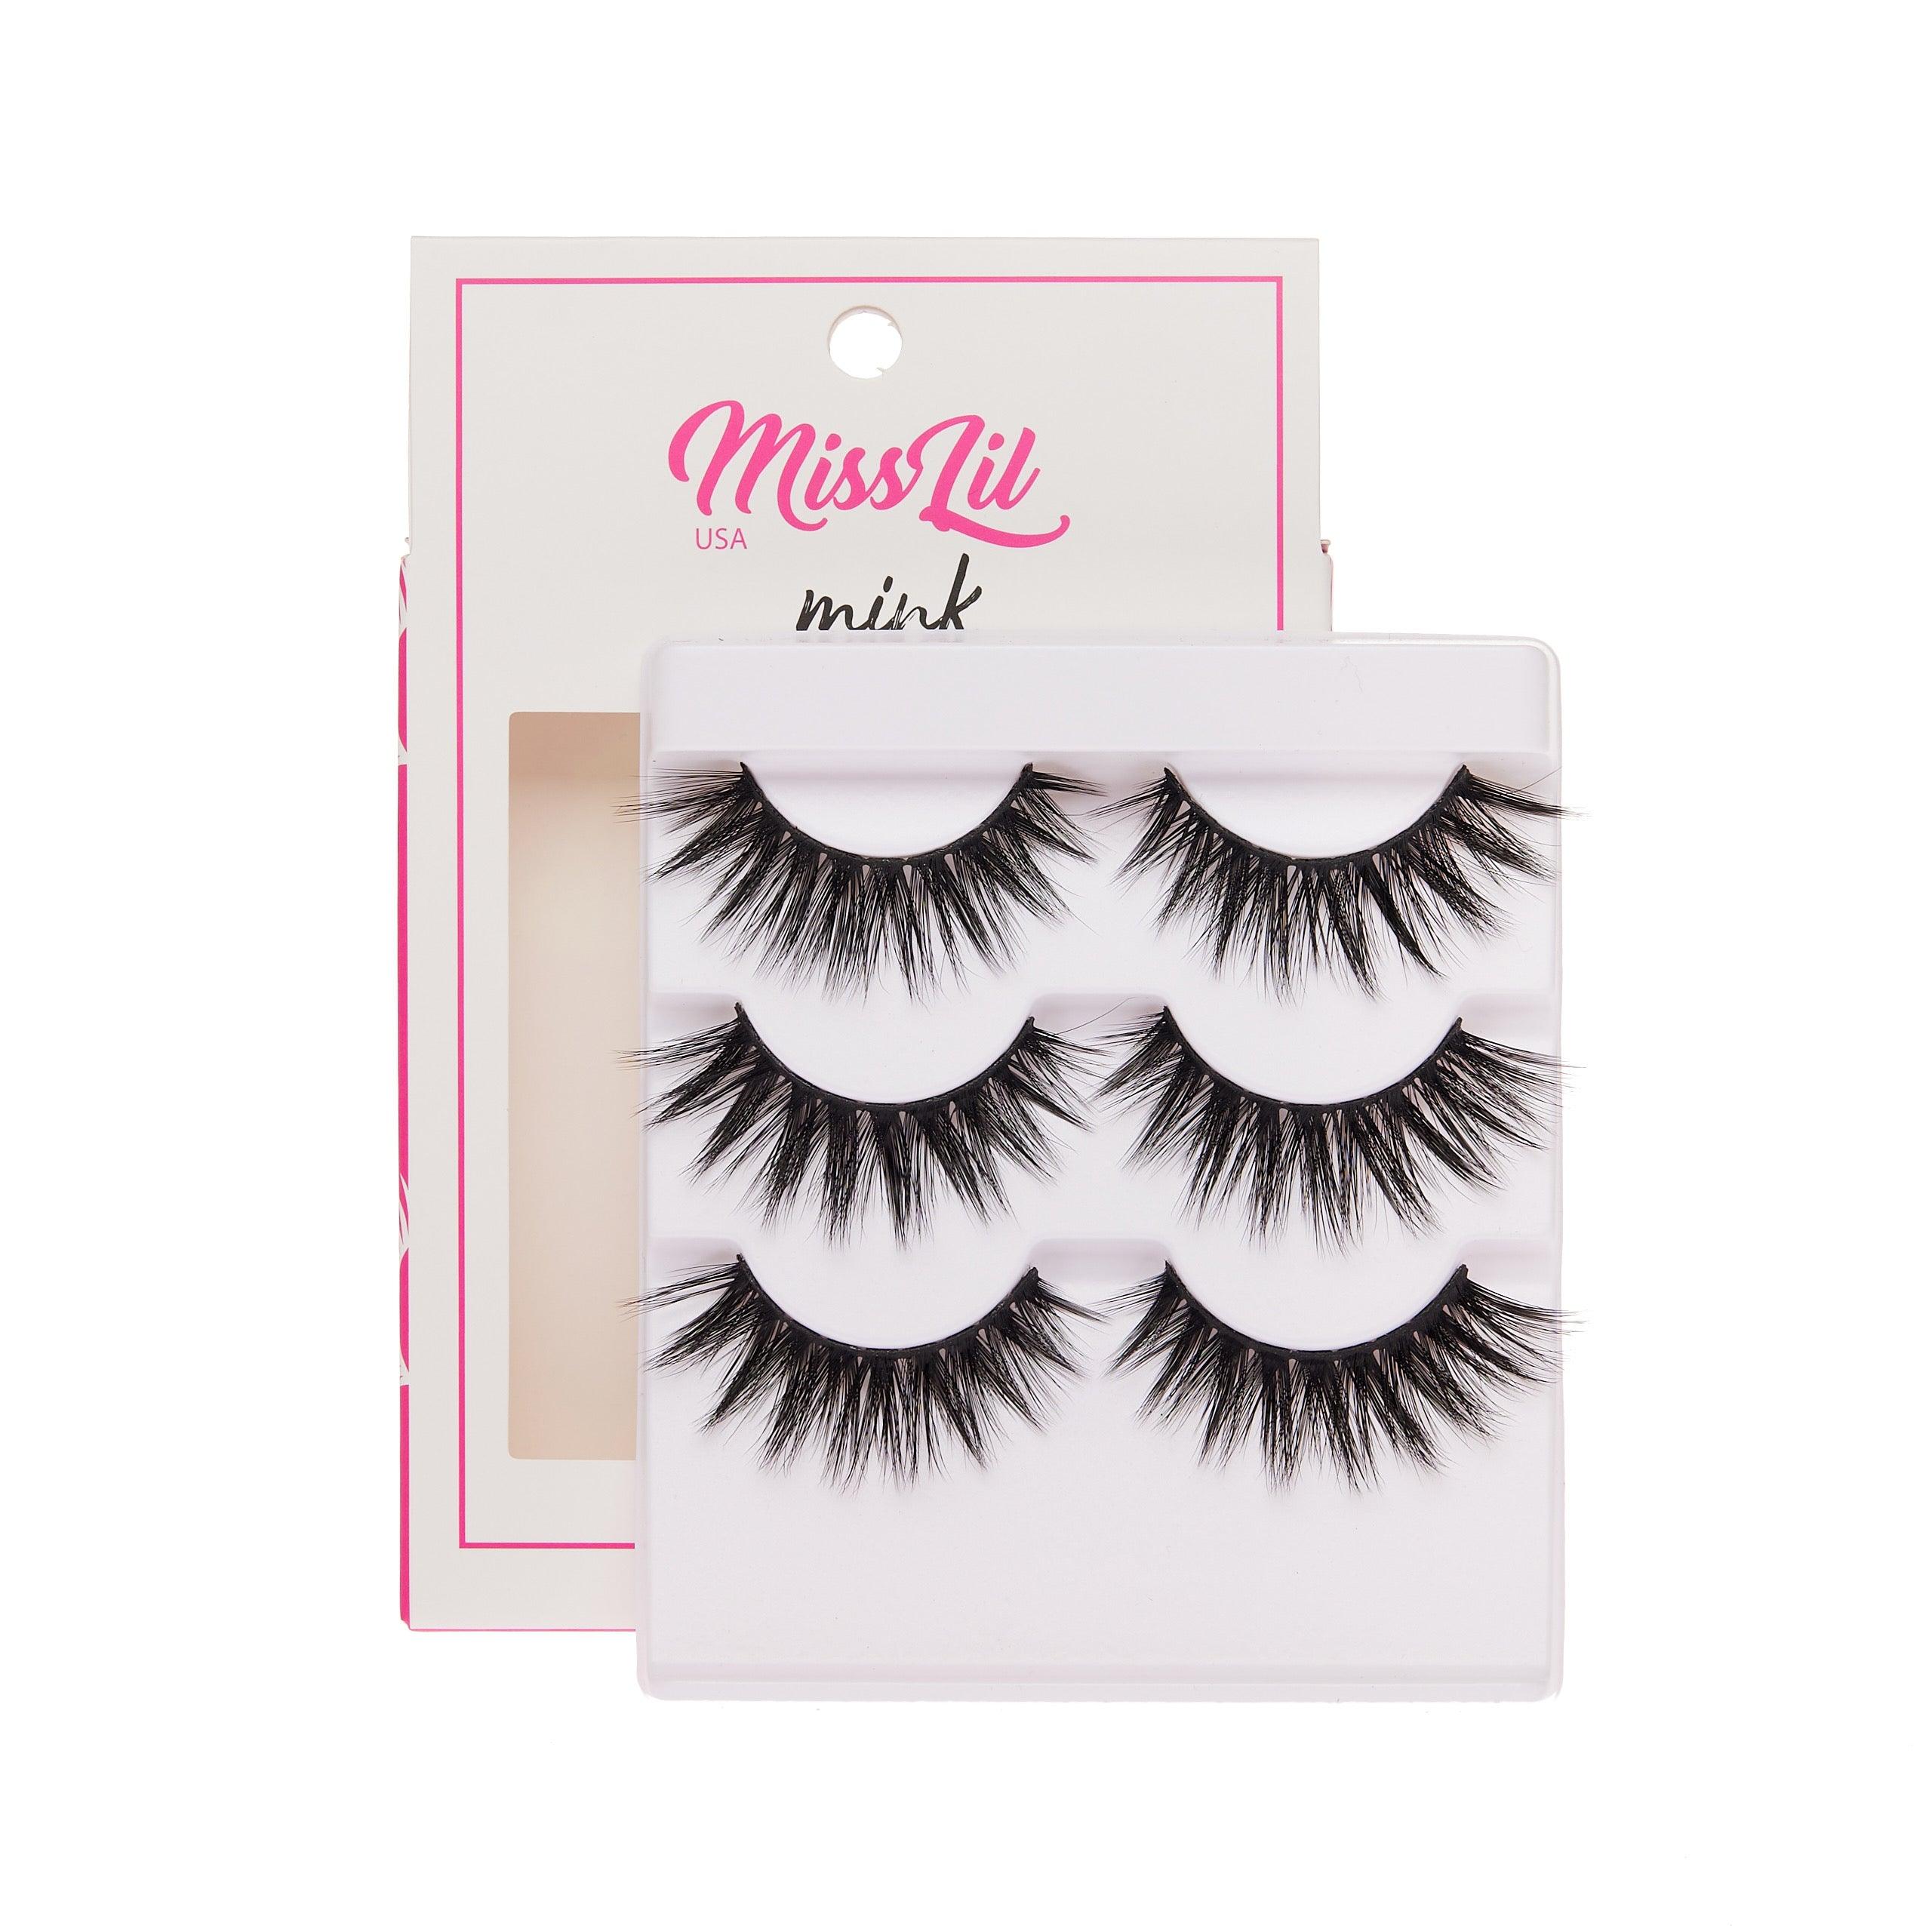 3-Pair Faux Mink Effect Eyelashes - Lash Party Collection #21 - Pack of 3 - Miss Lil USA